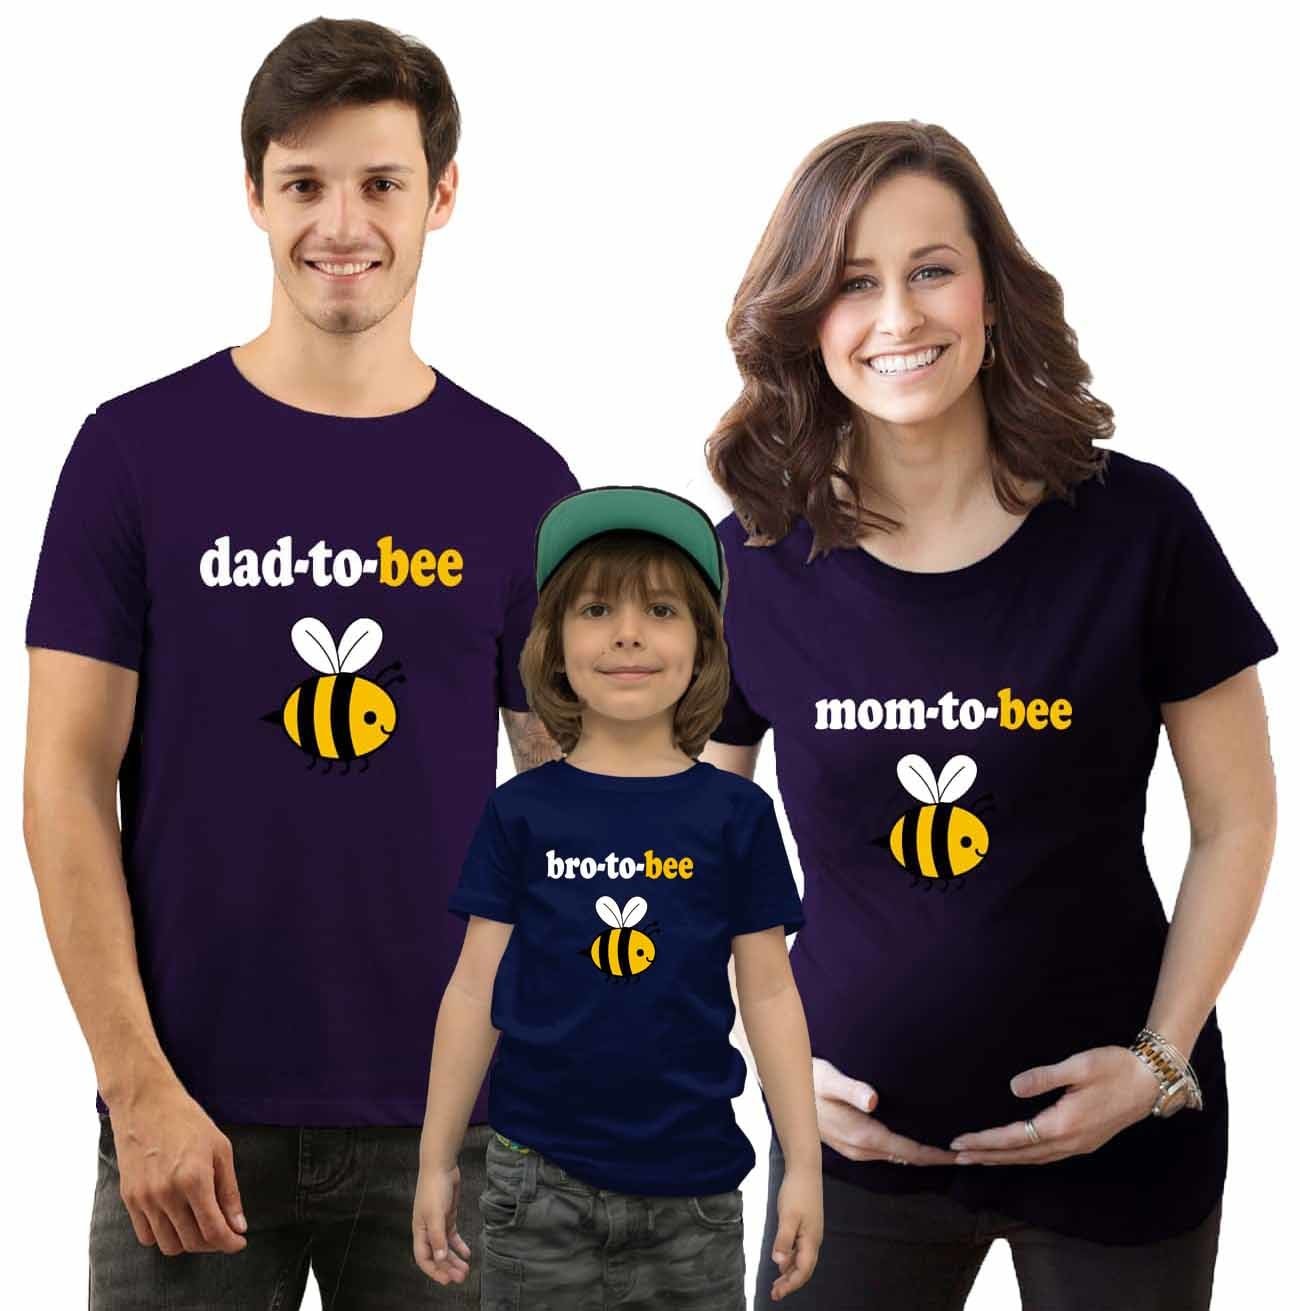 mom to bee dad bro parents to bee second pregnancy family tshirts matching new trend navy